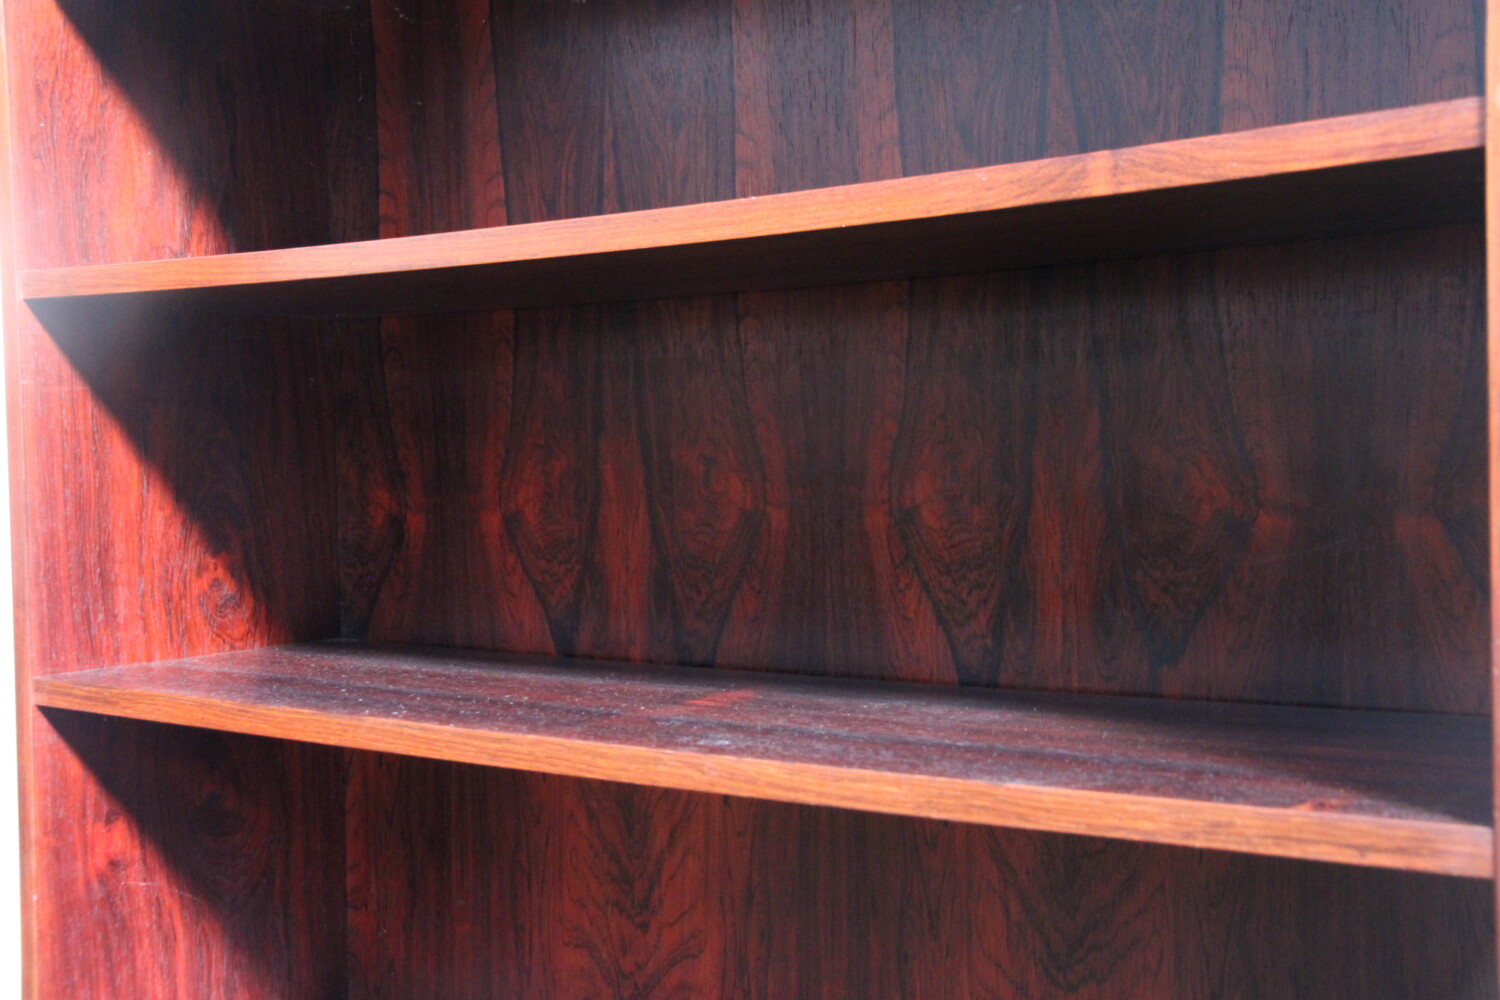 Pair of Rosewood Bookcases by Dammand & Rasmussen sold